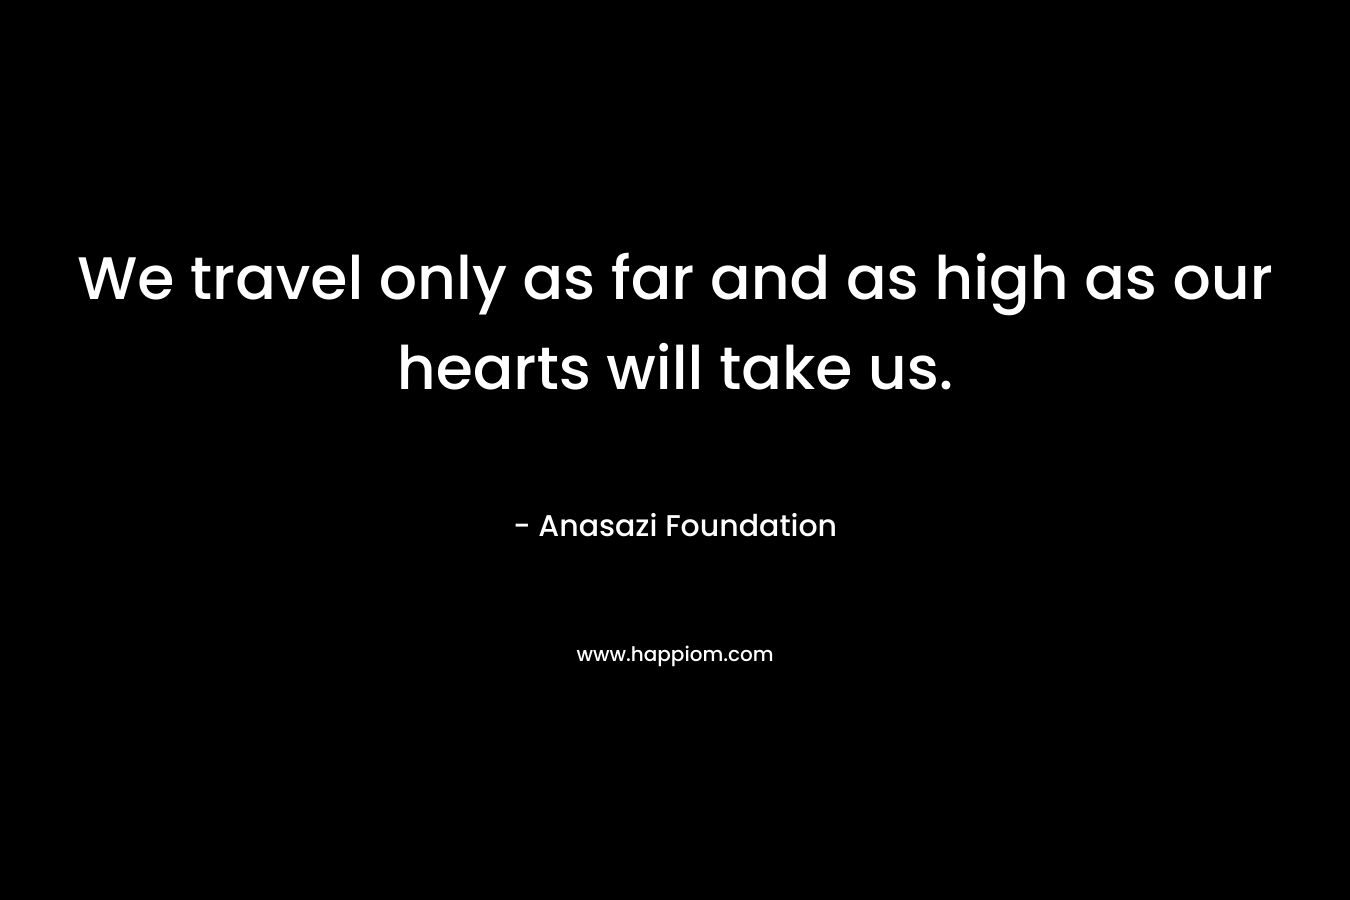 We travel only as far and as high as our hearts will take us.